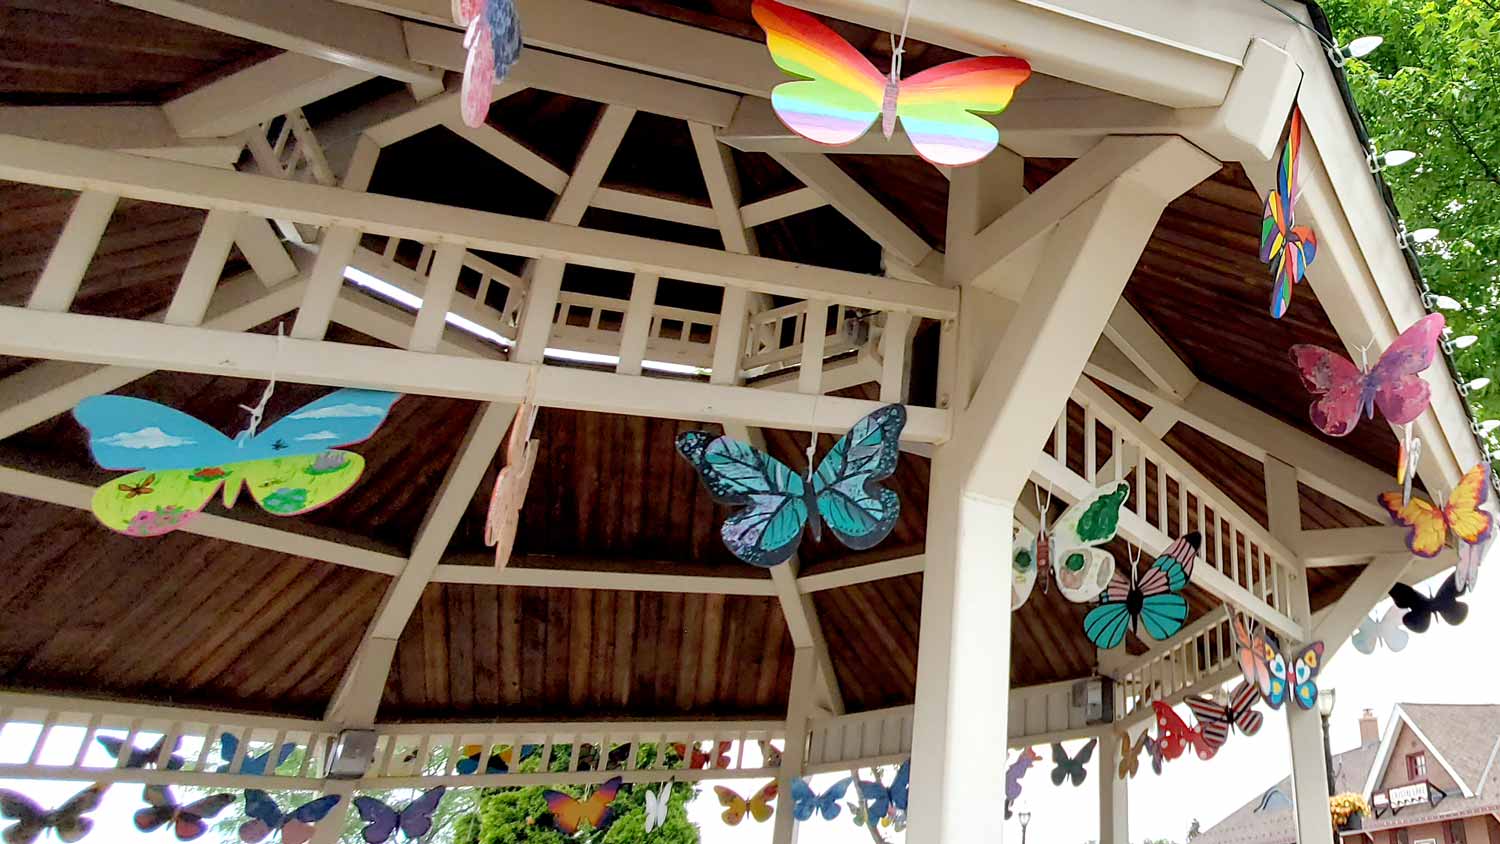 Decorative butterflies in the gazebo at the Downtown Crystal Lake Farmers Market.